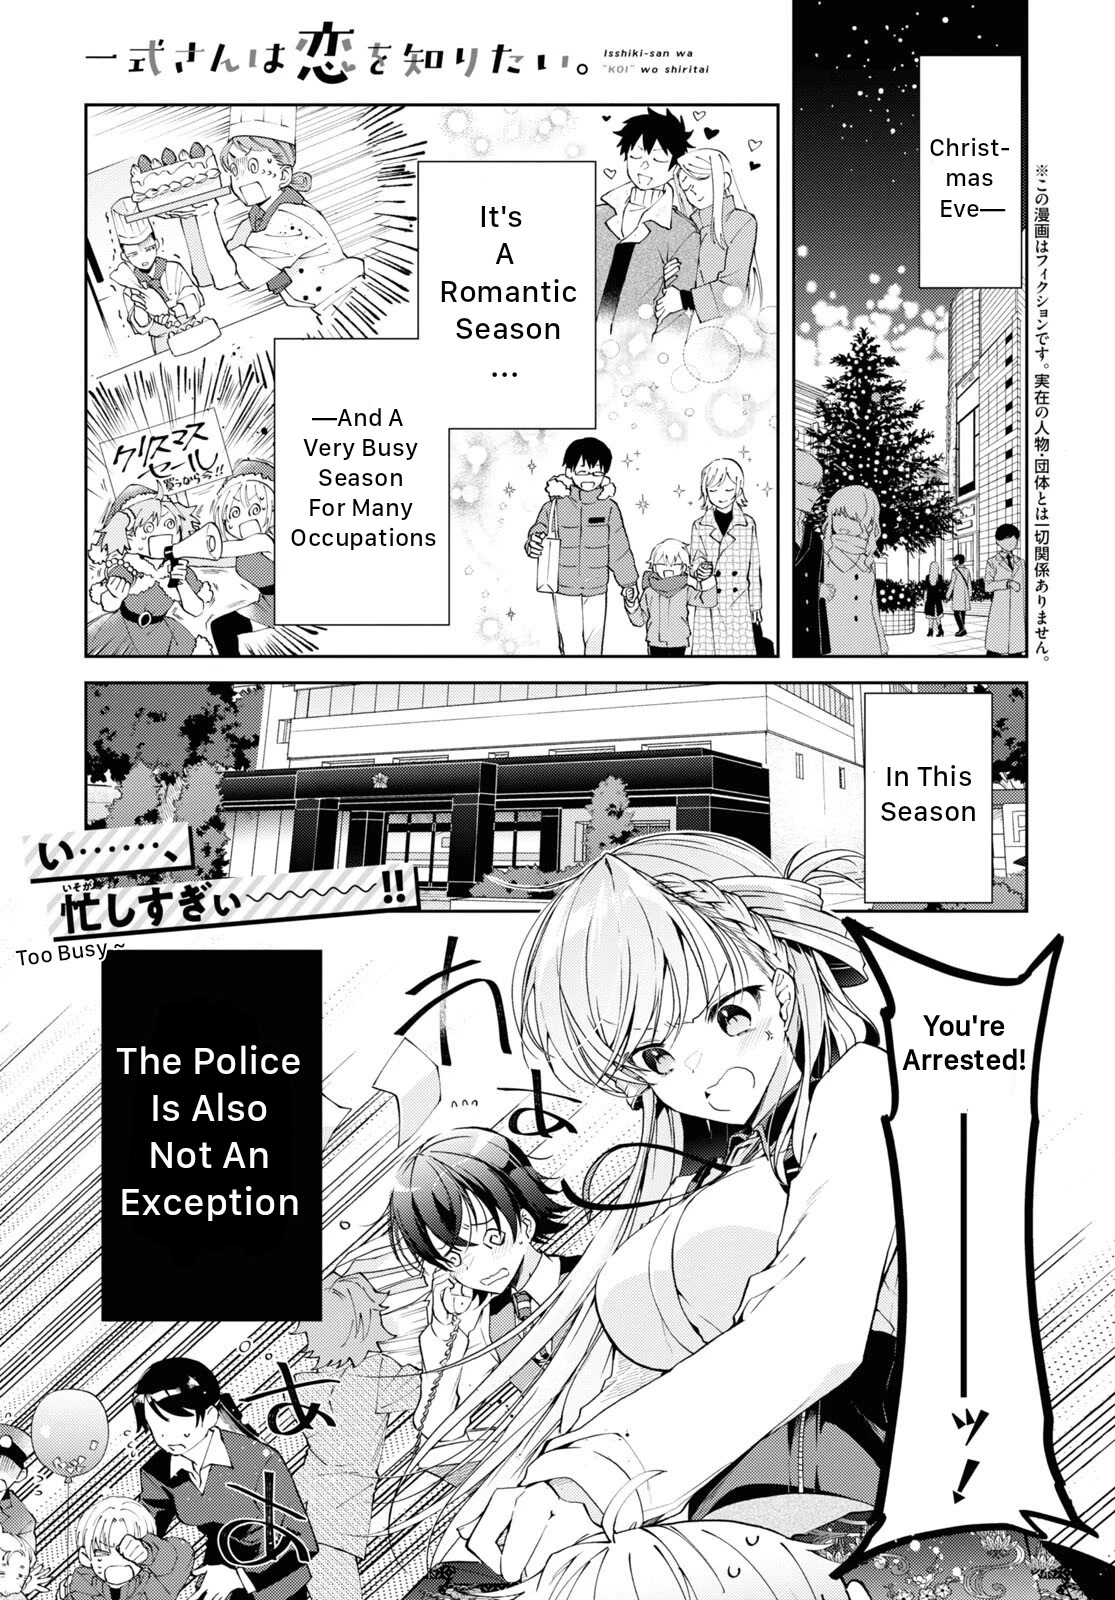 Isshiki-san Wants to Know About Love. - chapter 22 - #1